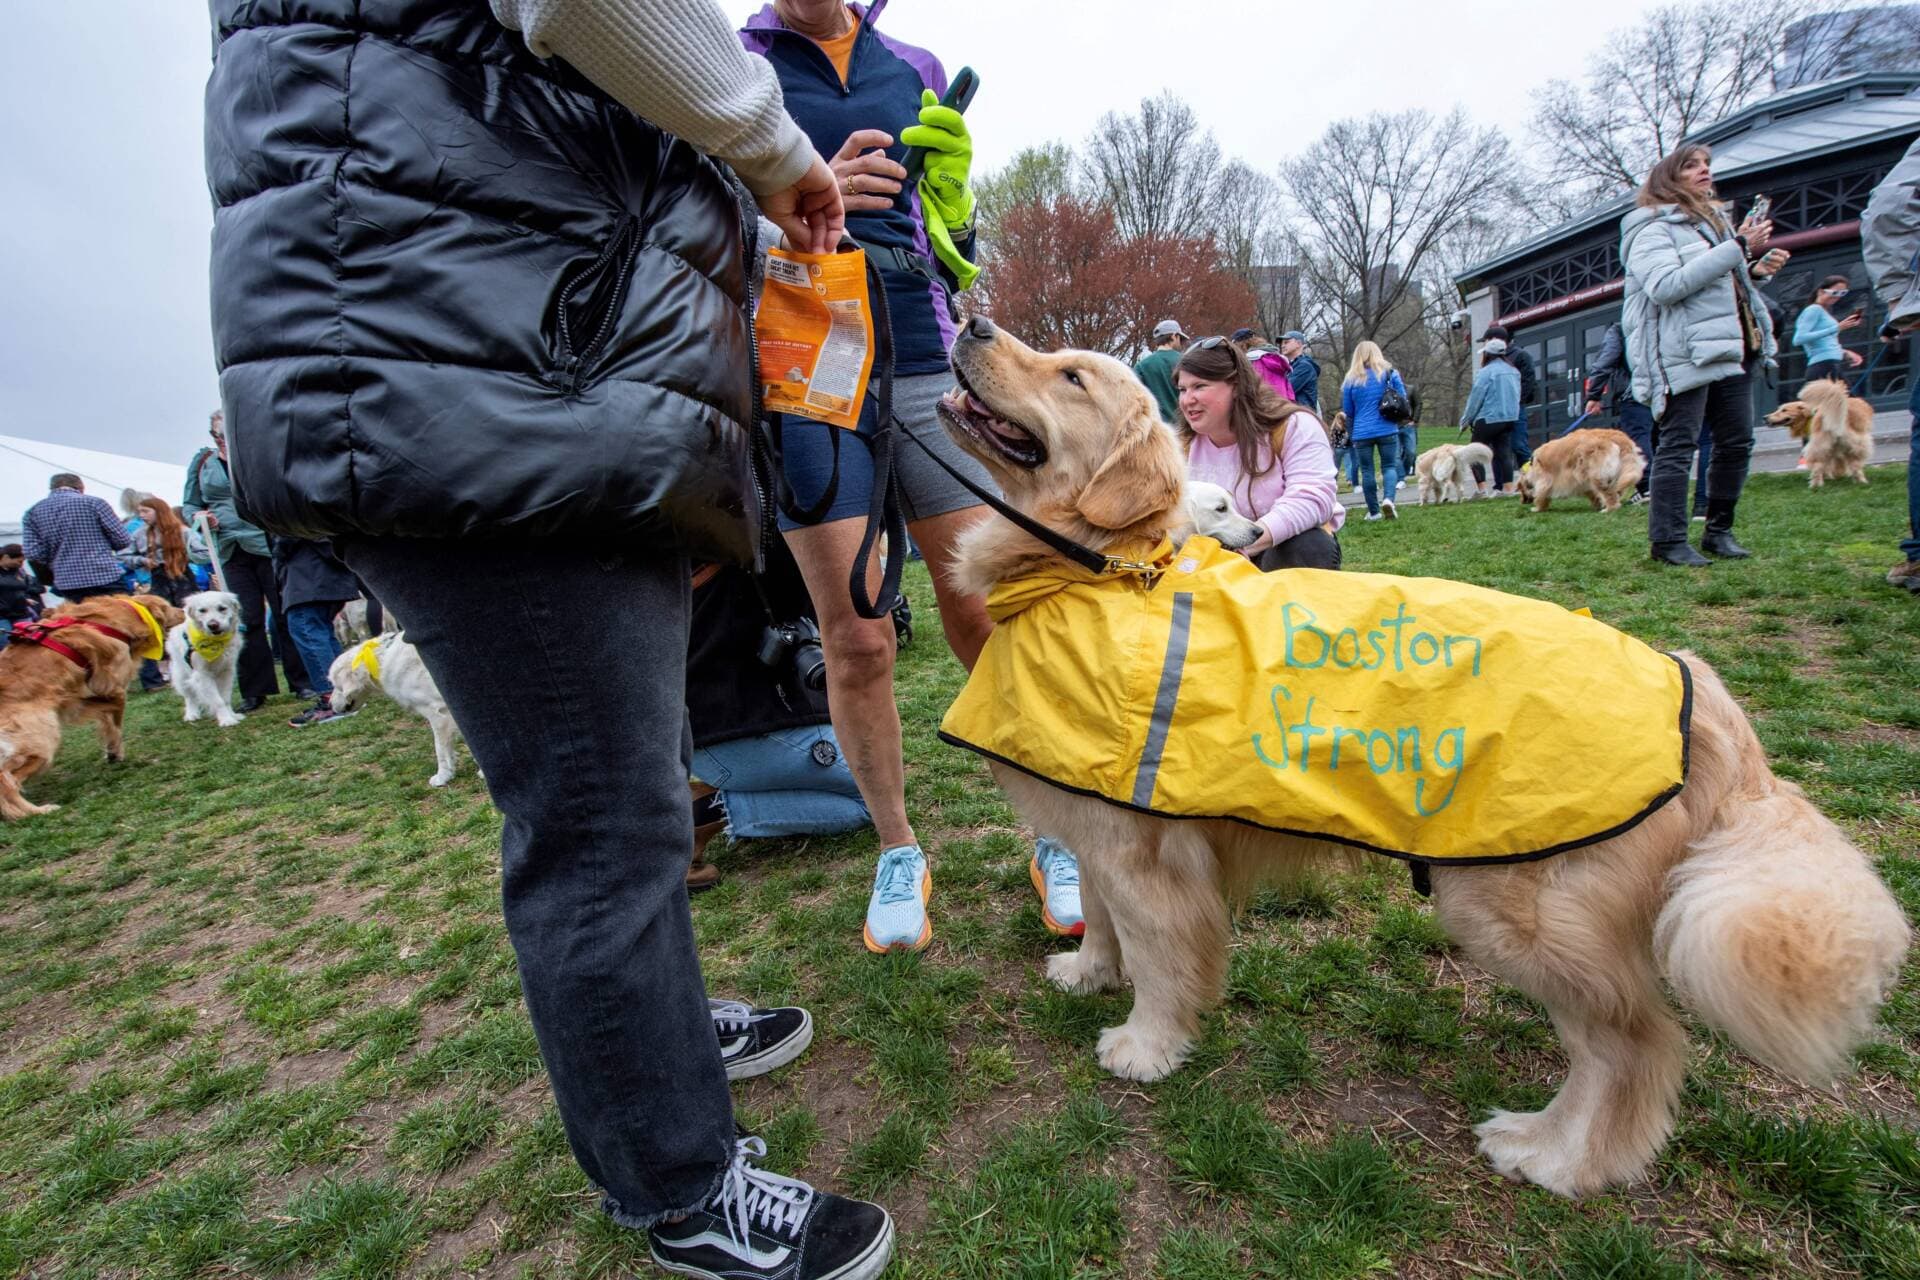 A golden retriever wears an outfit touting Boston Strong as dozens of golden retrievers gather with their owners, and some other breeds, to pose for photos and play together in Boston, Massachusetts, on April 16, 2023. - Boston Strong is a symbol of the strength of Boston coming together after the marathon bombings ten years ago. (Joseph Prezioso/AFP via Getty Images)